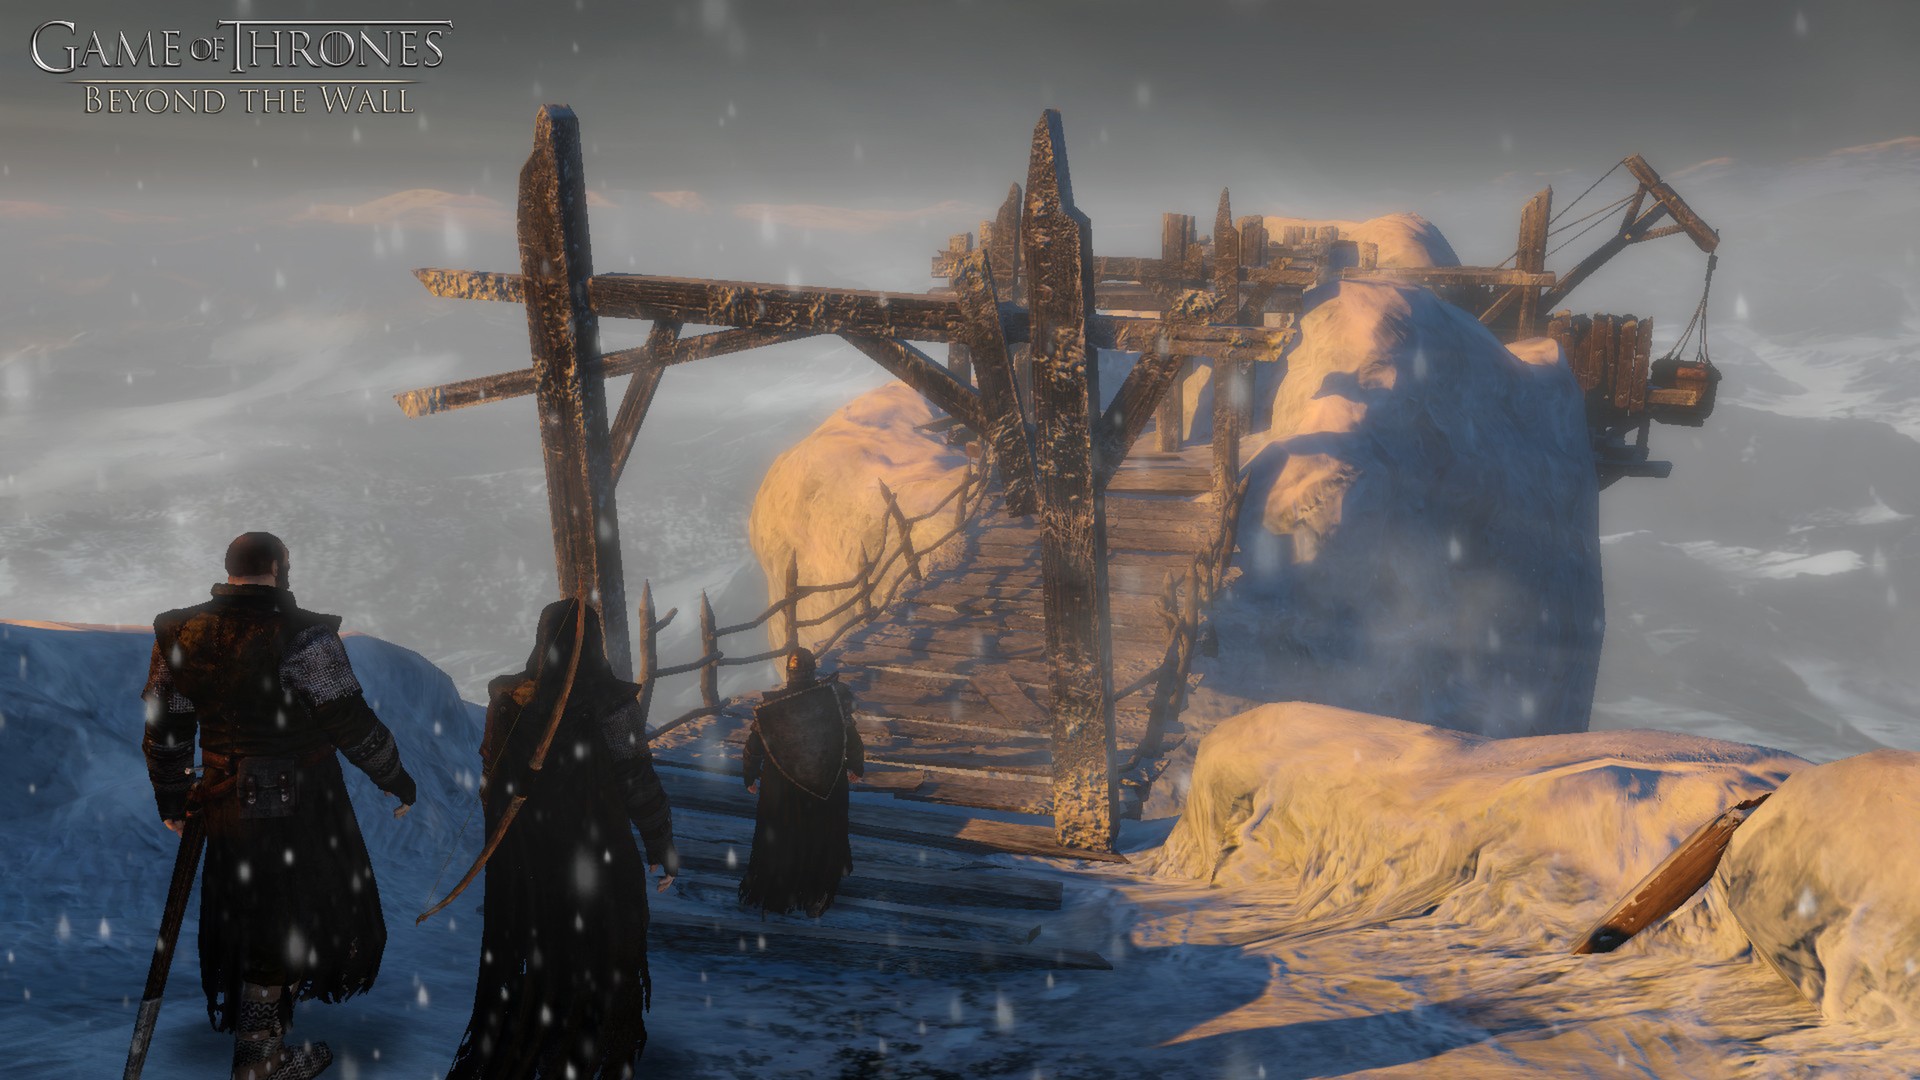 Game of Thrones - Beyond the Wall (Blood Bound) DLC Featured Screenshot #1